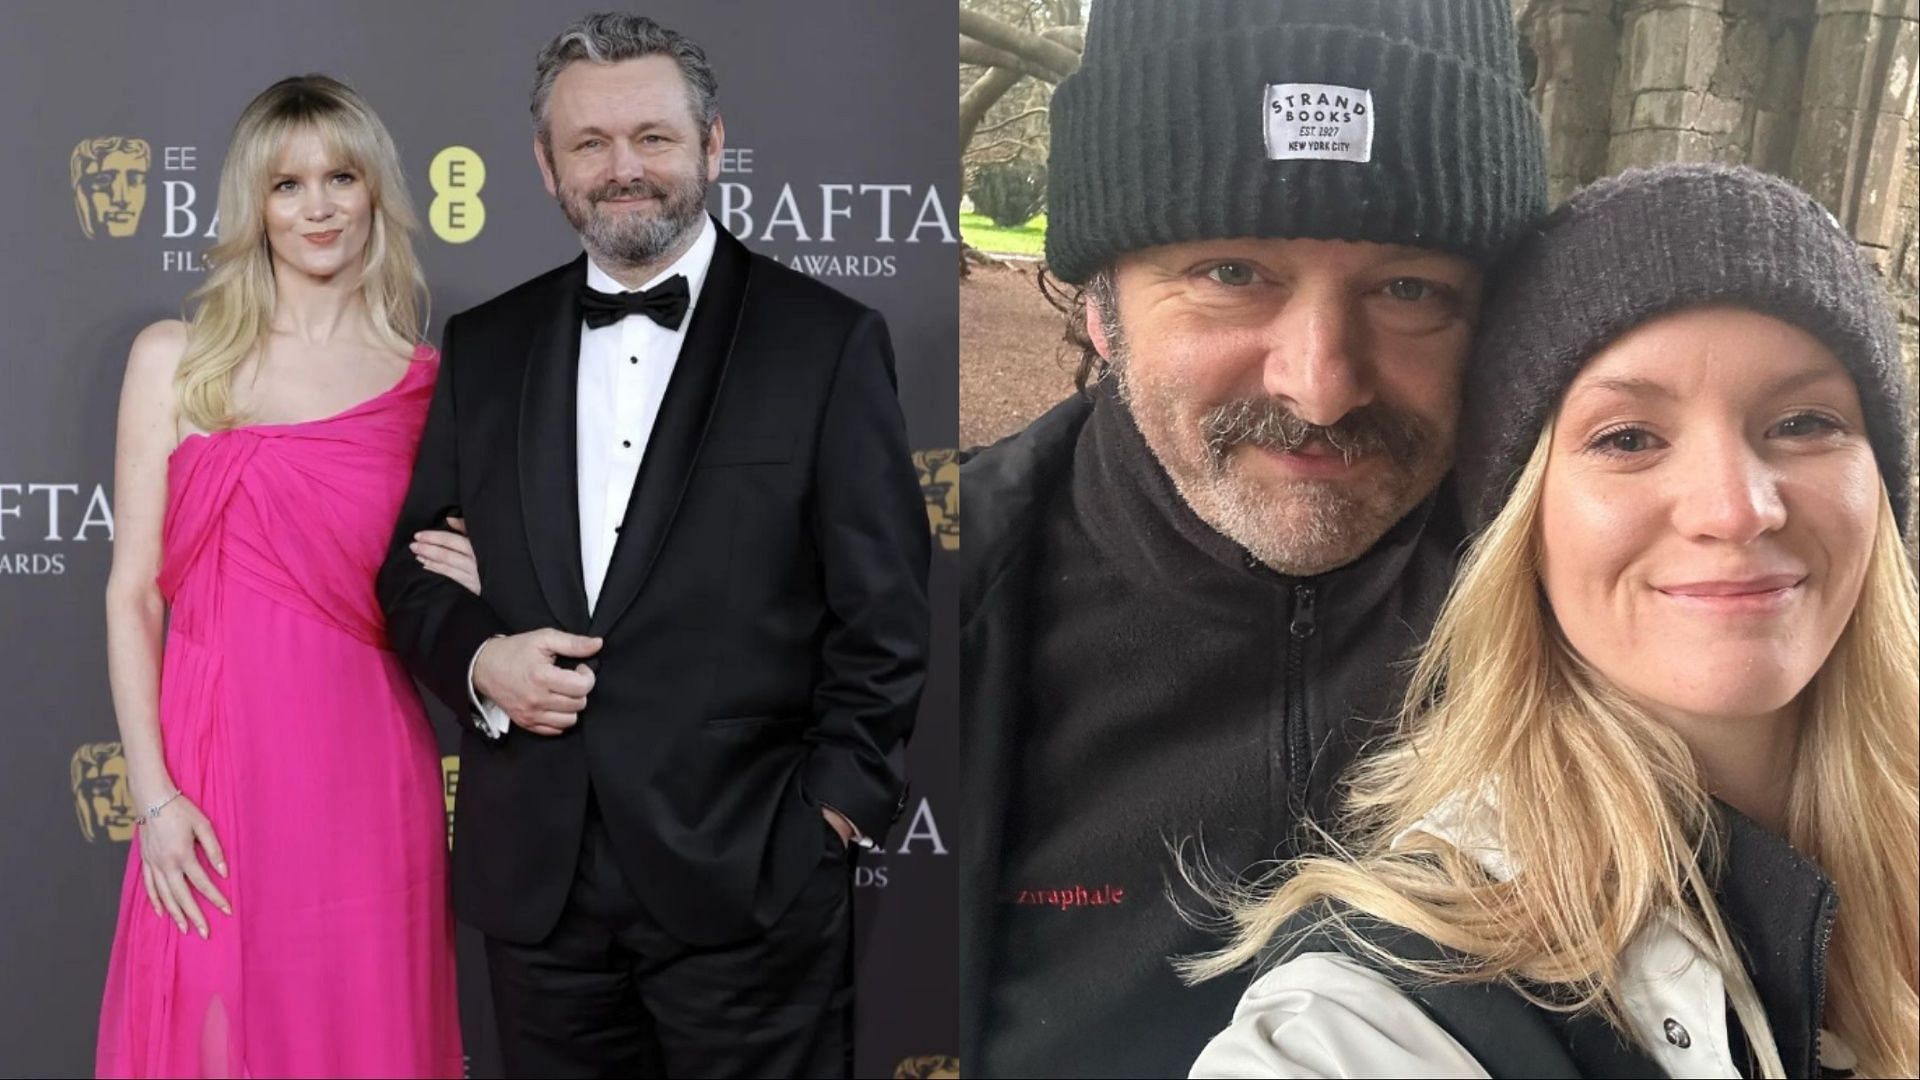 Michael Sheen opens up about relationship with Anna Lundberg (Image via anna_lundbergs/Instagram)